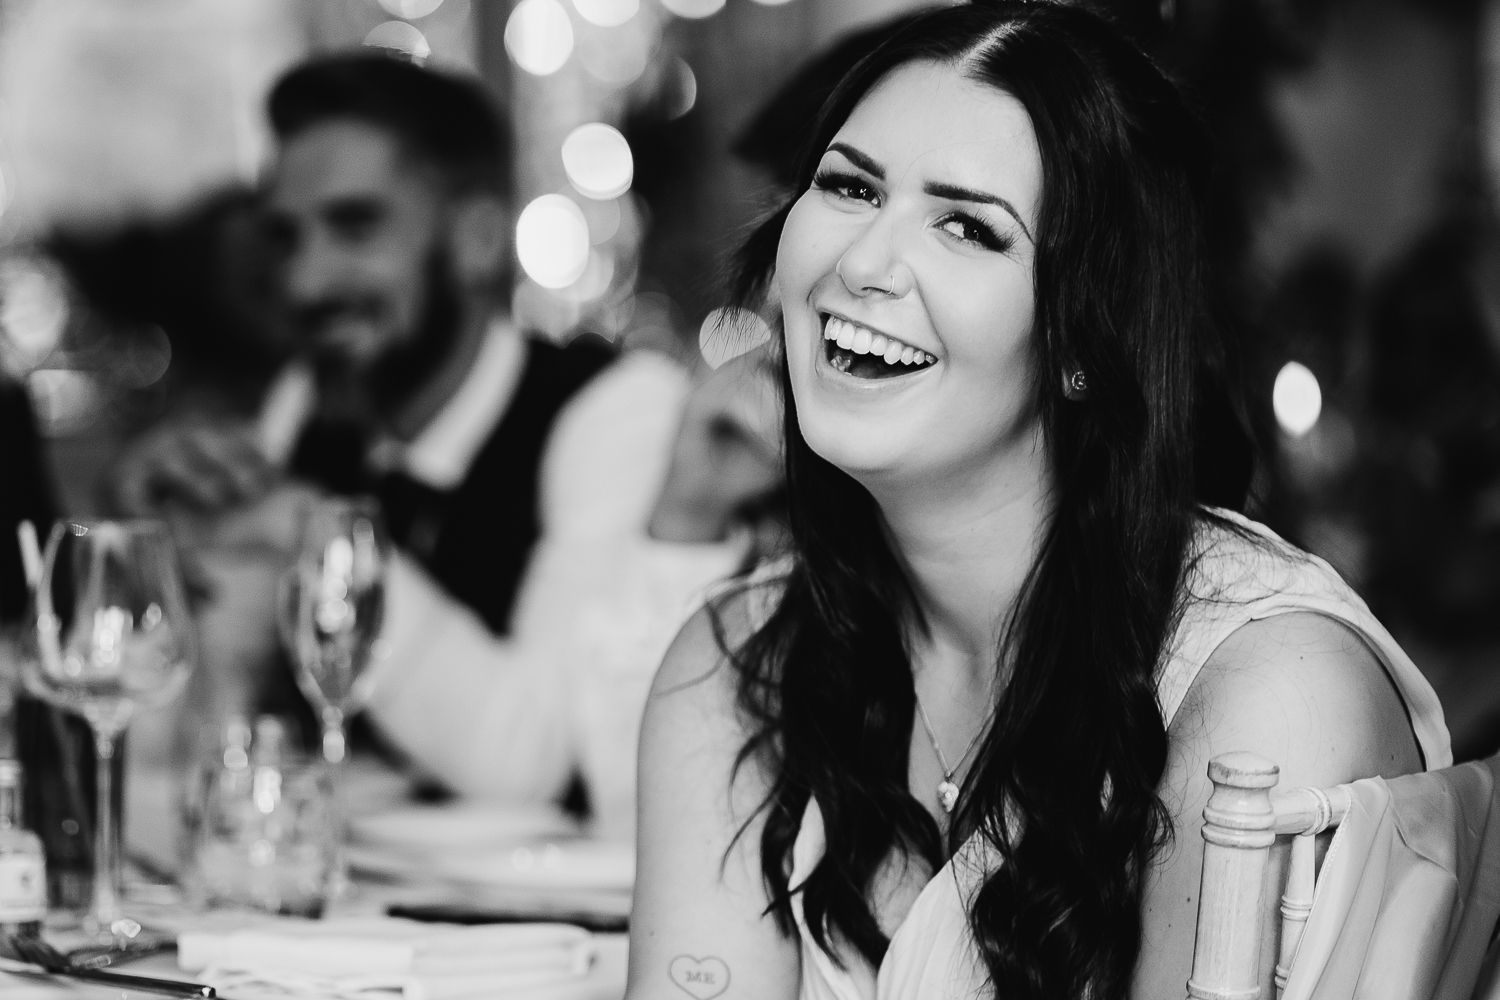 Wedding guest laughing